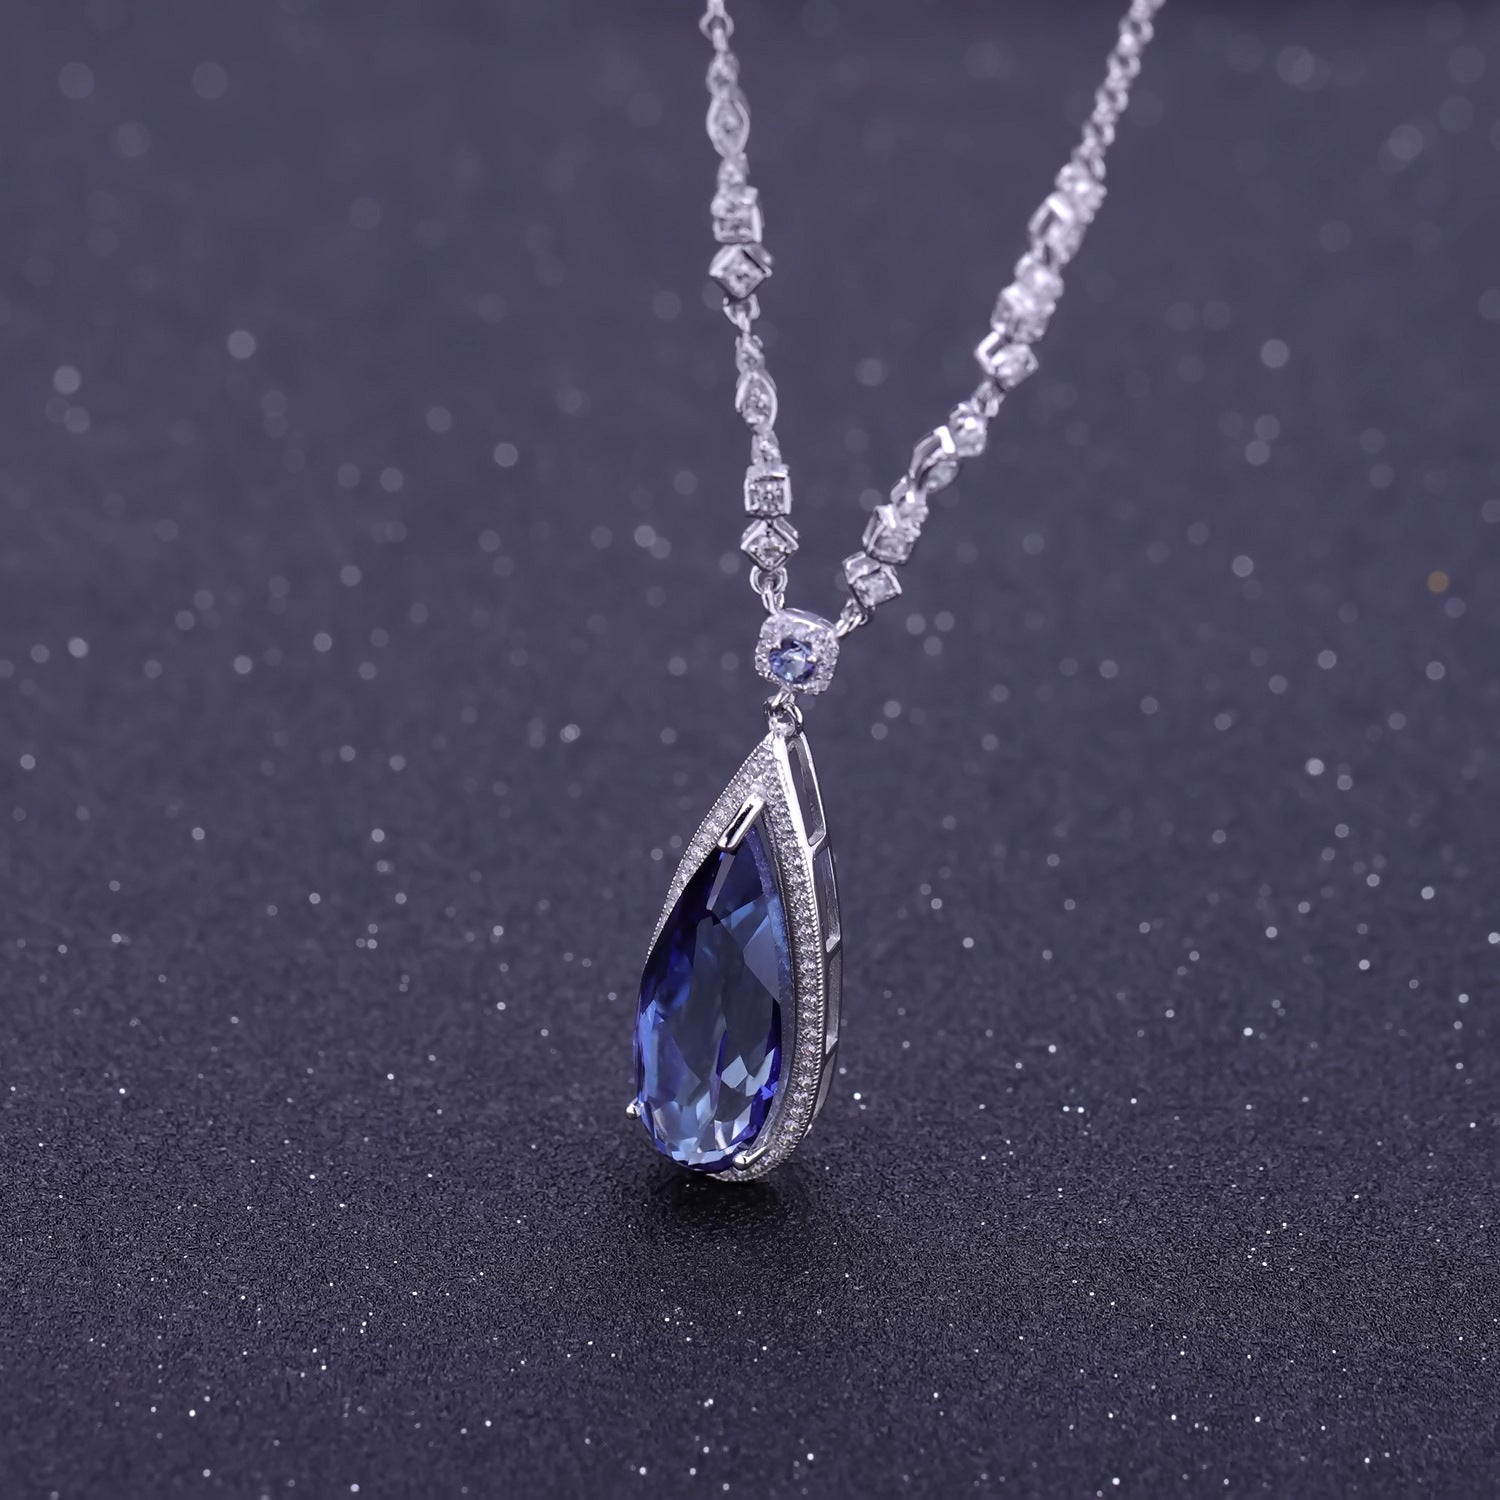 Luxurious Design Inlaid Natural Crystal Soleste Halo Water Droplet Pendant Silver Necklace for Women